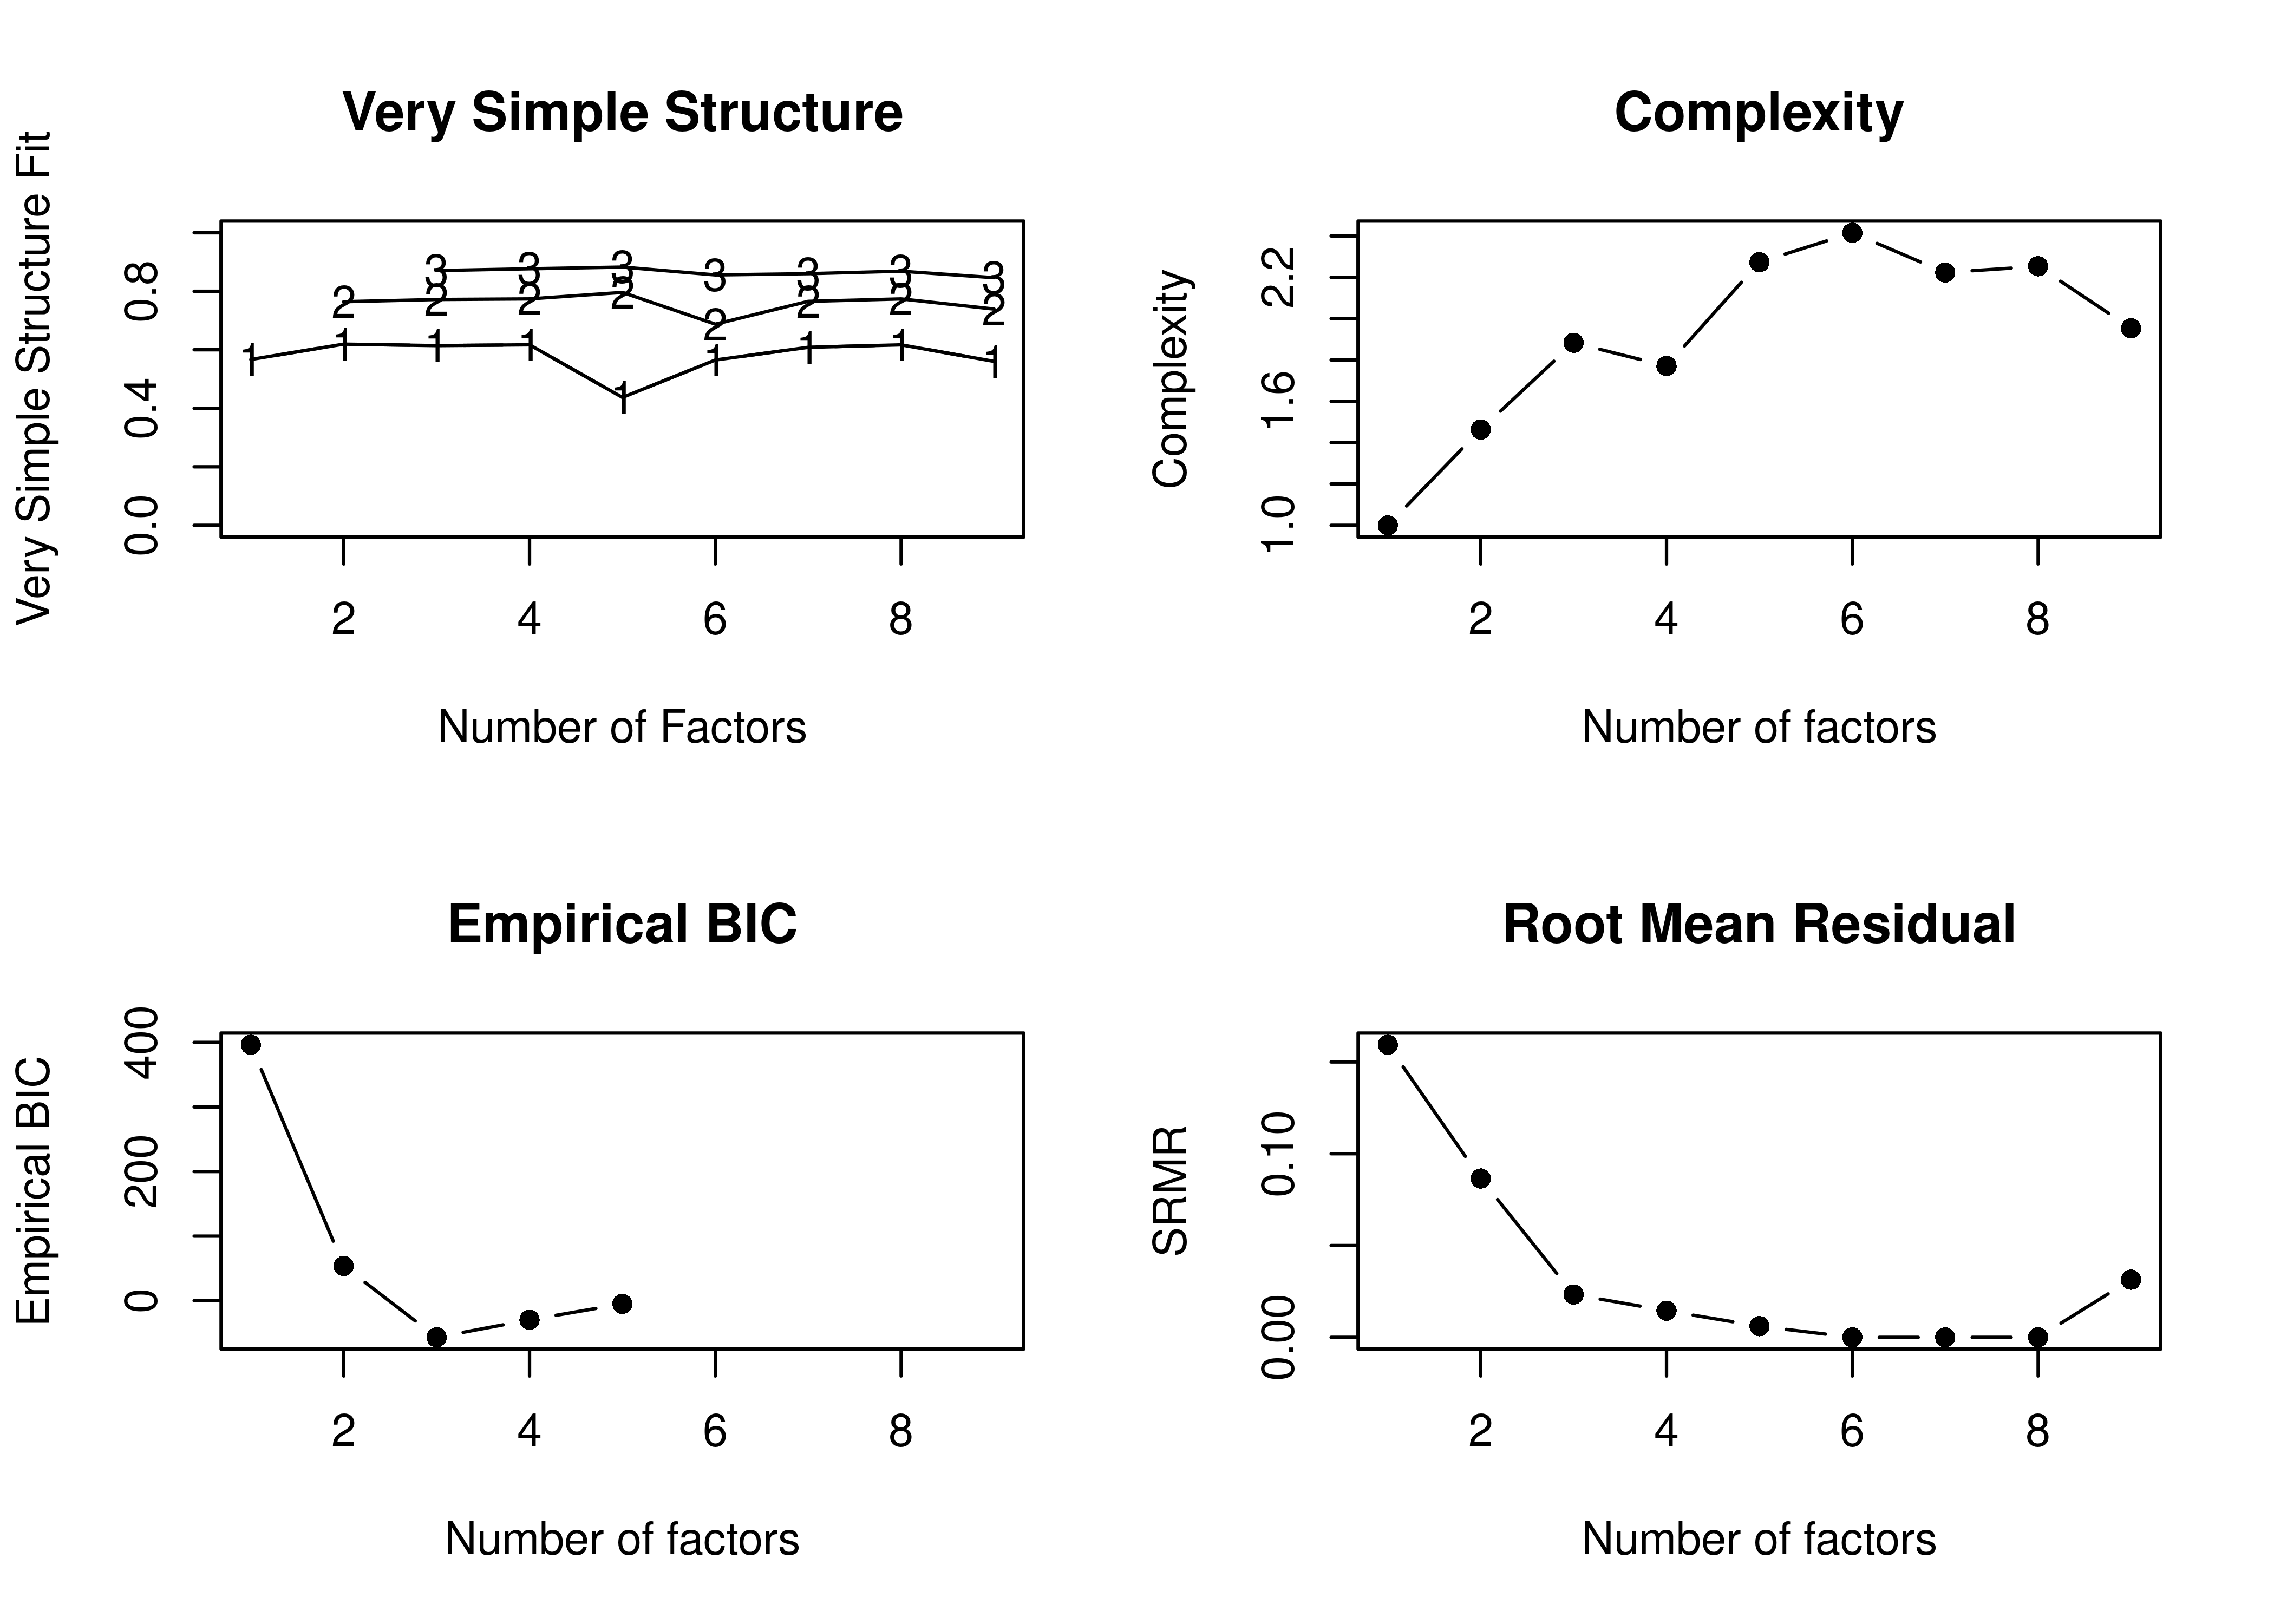 Very Simple Structure-Related Indices With no Rotation in Exploratory Factor Analysis.